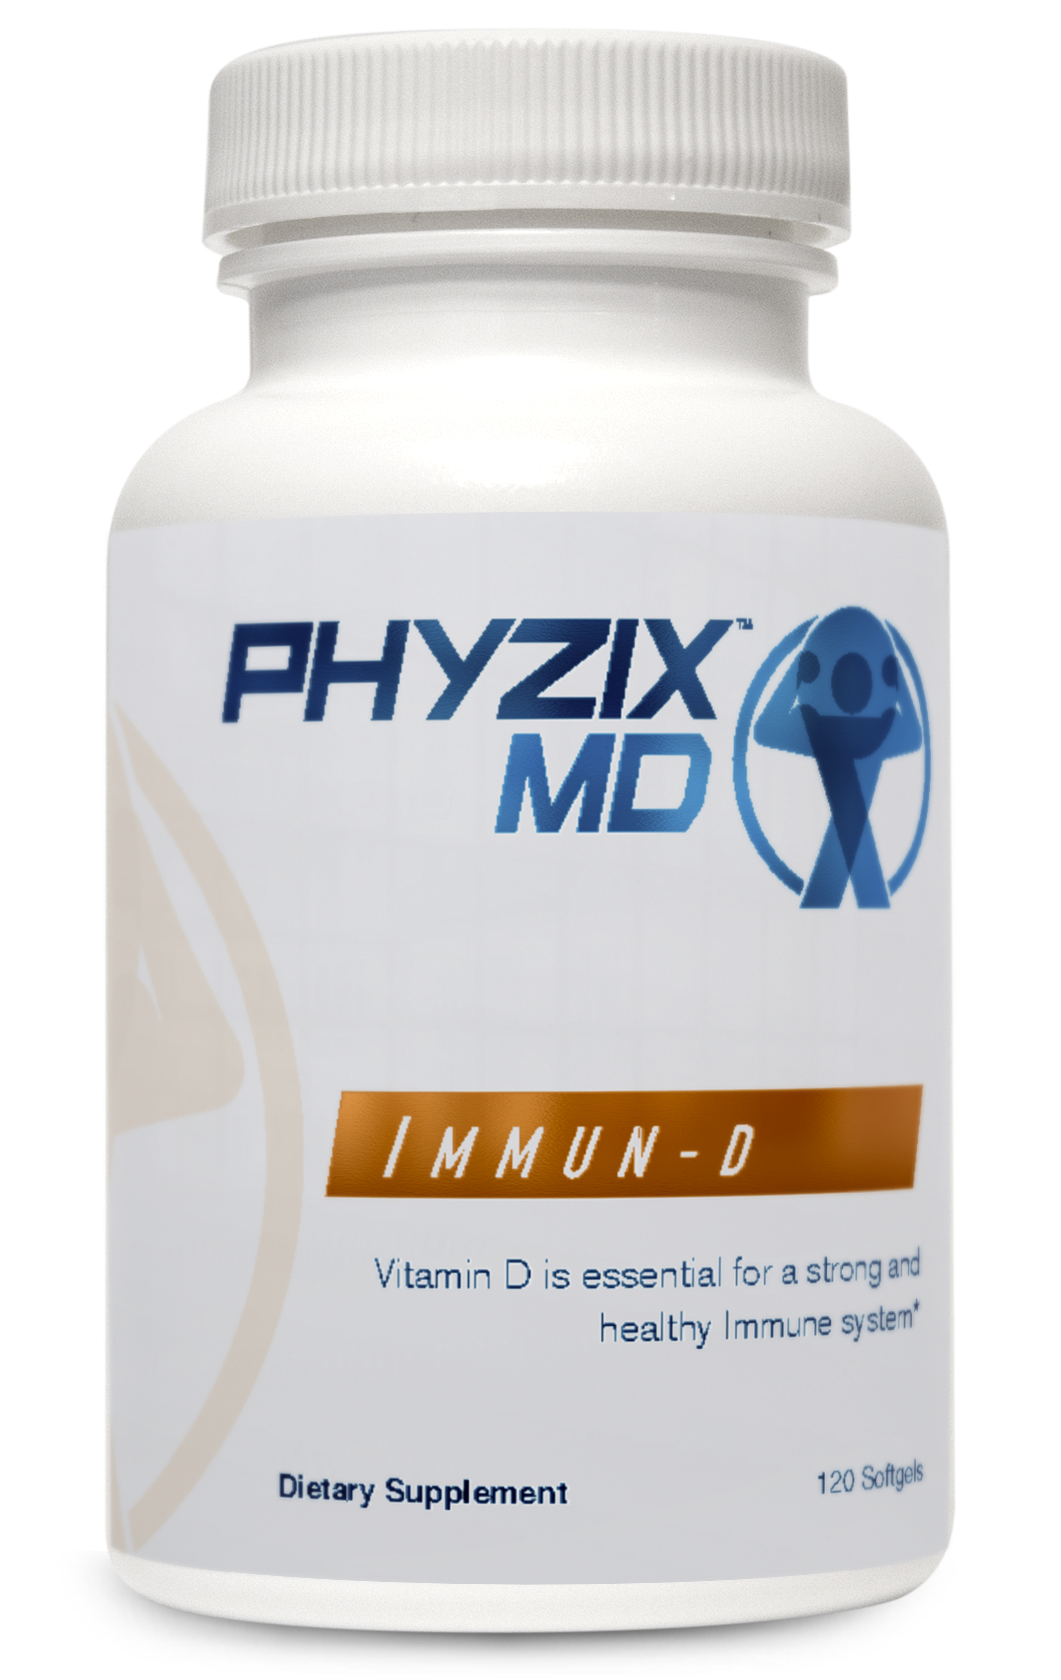 Immun-D is one of the new Phyzix MD products we're launching.